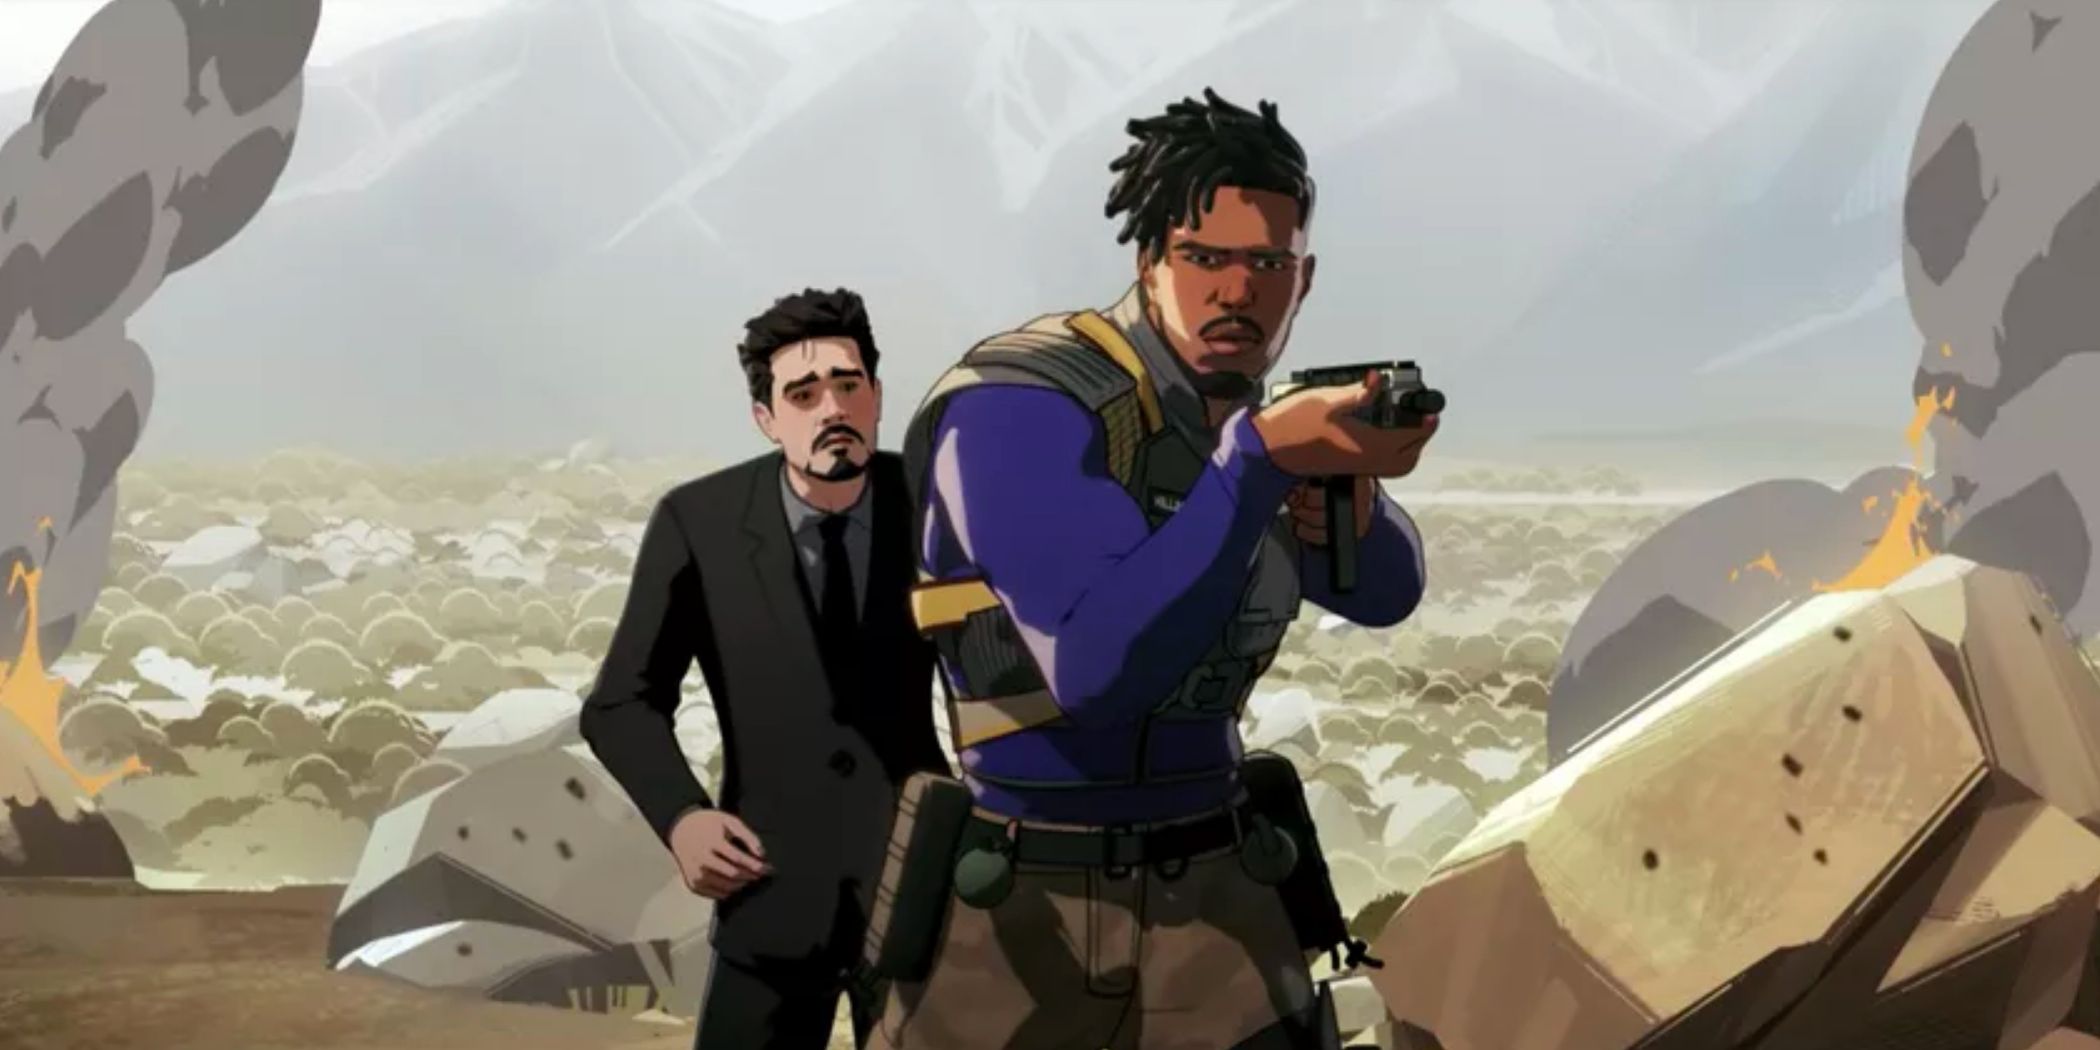 Erik Killmonger stands in front of Tony Stark with his gun in What If episode 6